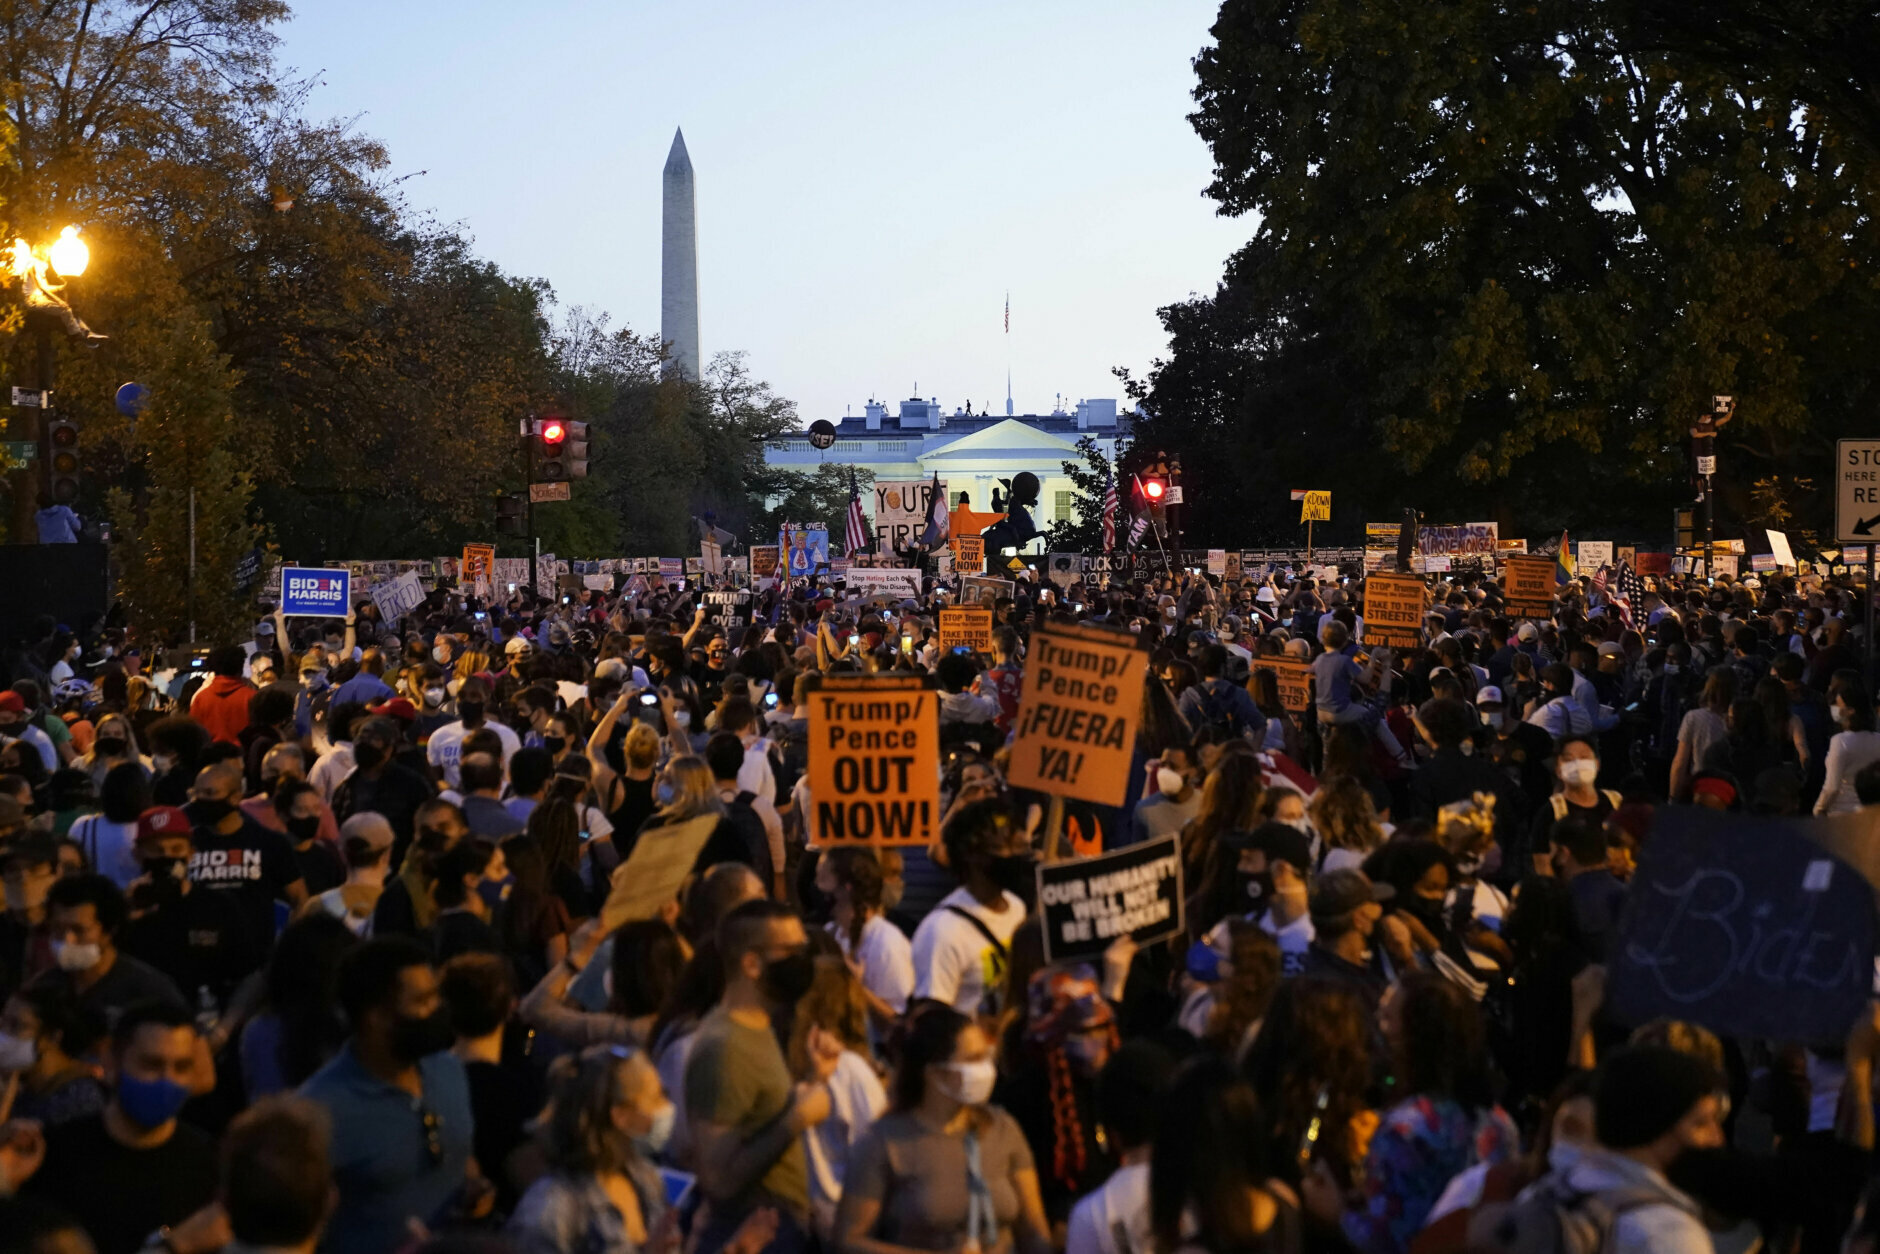 People celebrate in the streets outside the White House.